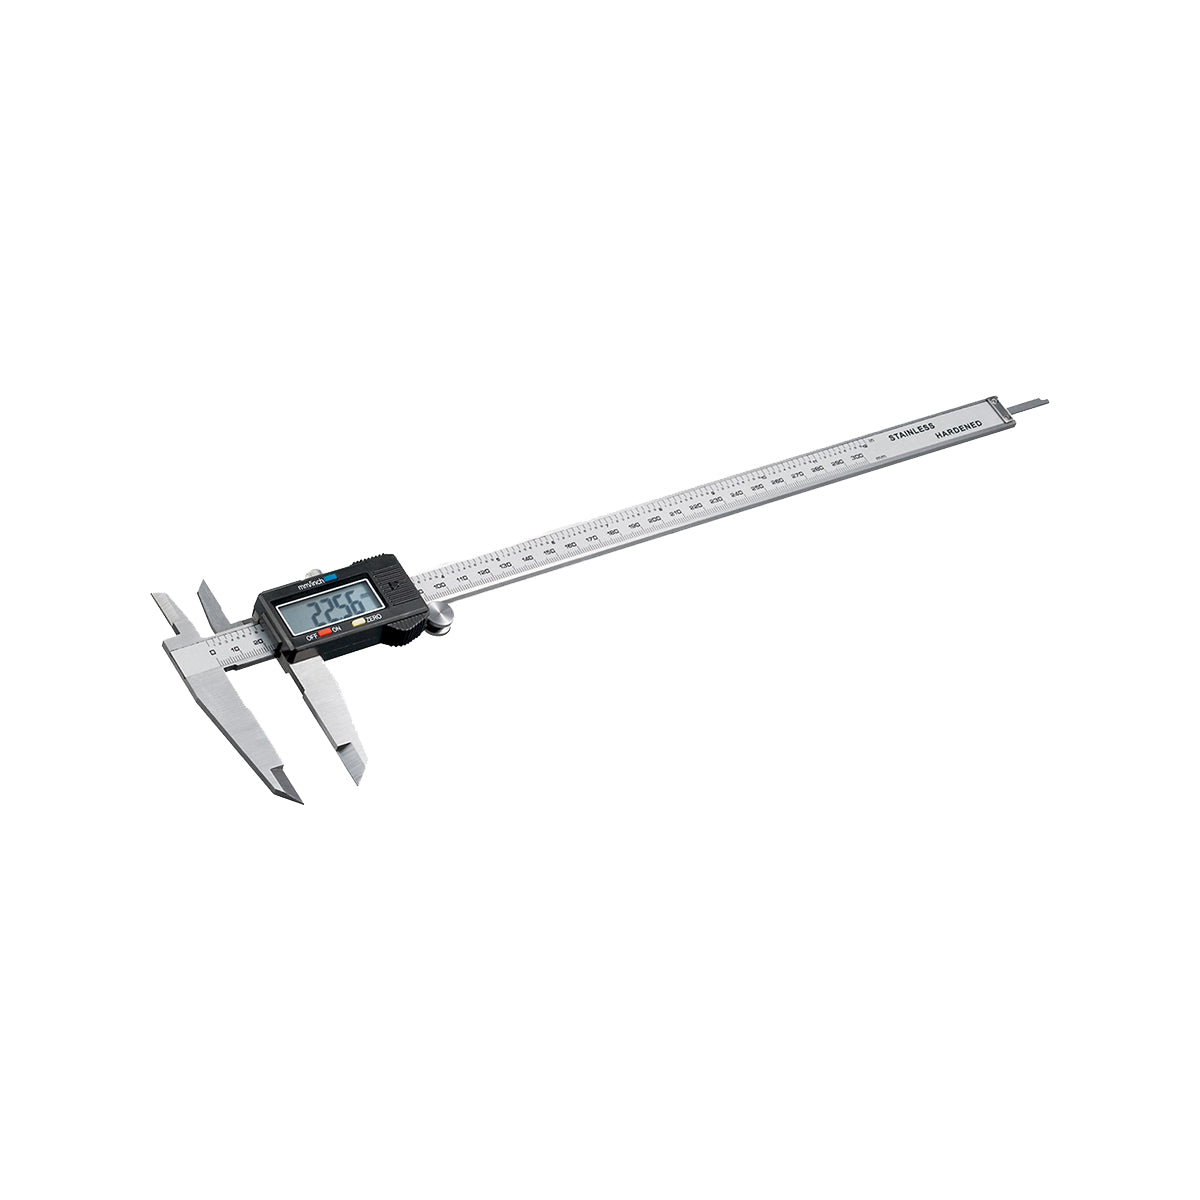 Goobay Digital Caliper 300 mm / 12 Inch for Measurements from 0 mm - 300 mm